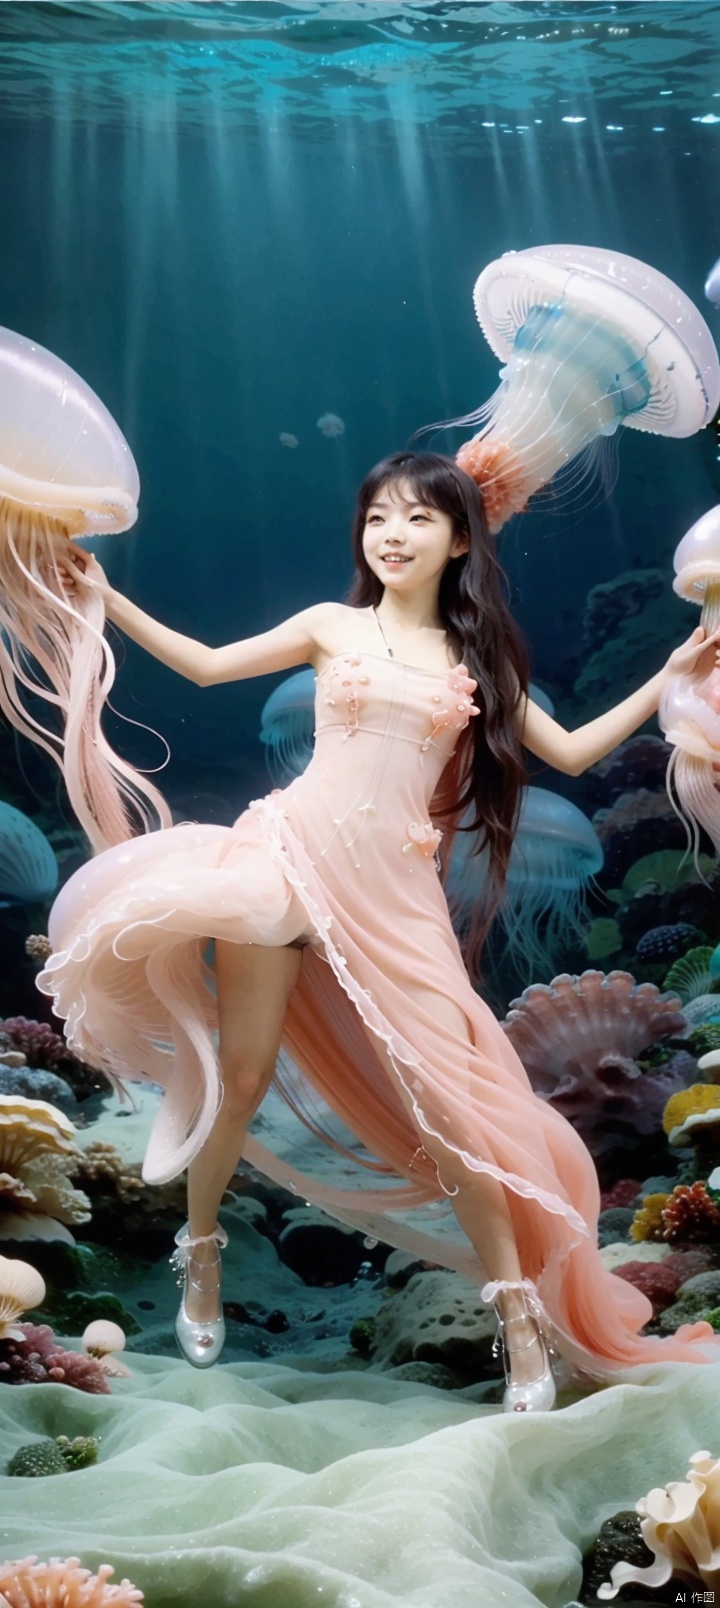   (***** full body:1.5),(very big jellyfish:1.5),(under sea:1.5),(dance:1.3),(seabed:1.5),laugh,smile,happy,exciting,very transparent gauze garment,very transparent clothing,twintails,hair buns,straight hair,long hair,black hair,Narrow shoulders,extremely detailed eyes and face, beautiful detailed eyes,big eyes, jellyfish,coral,octopus,shell,shells,jellyfish,coral,octopus,shell,shells,very long hair,